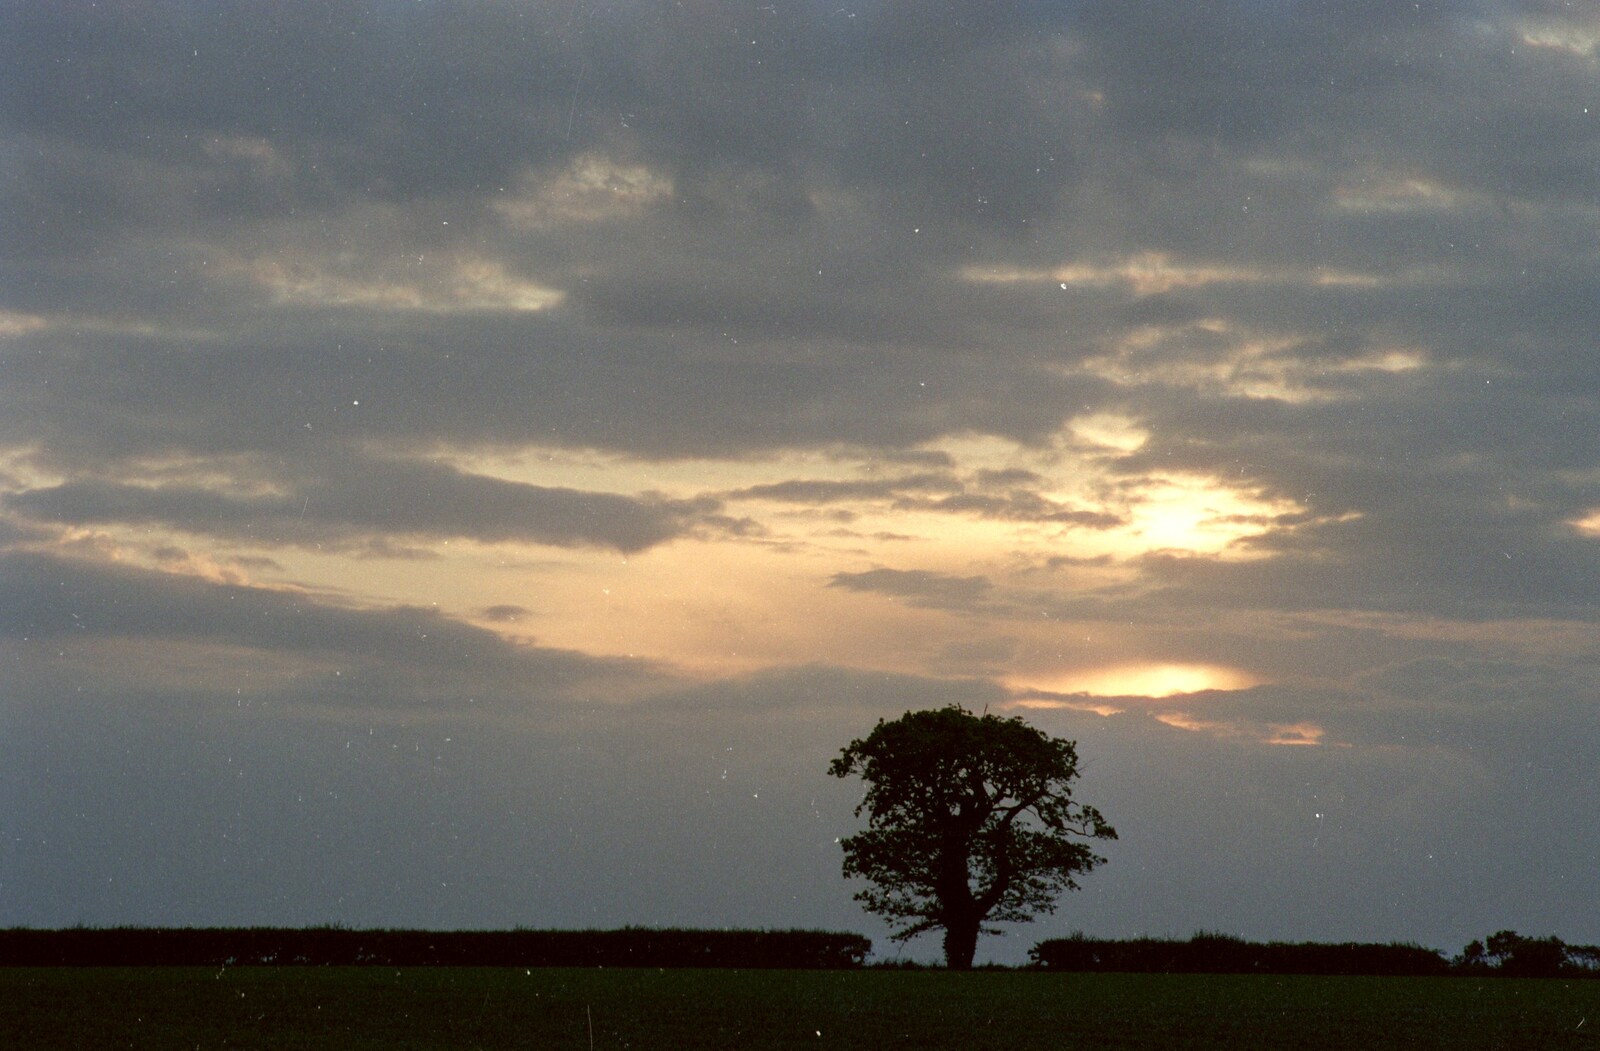 A lonely tree from Sewell's Cottage Garden Telly, Red House, Norfolk - 14th May 1988